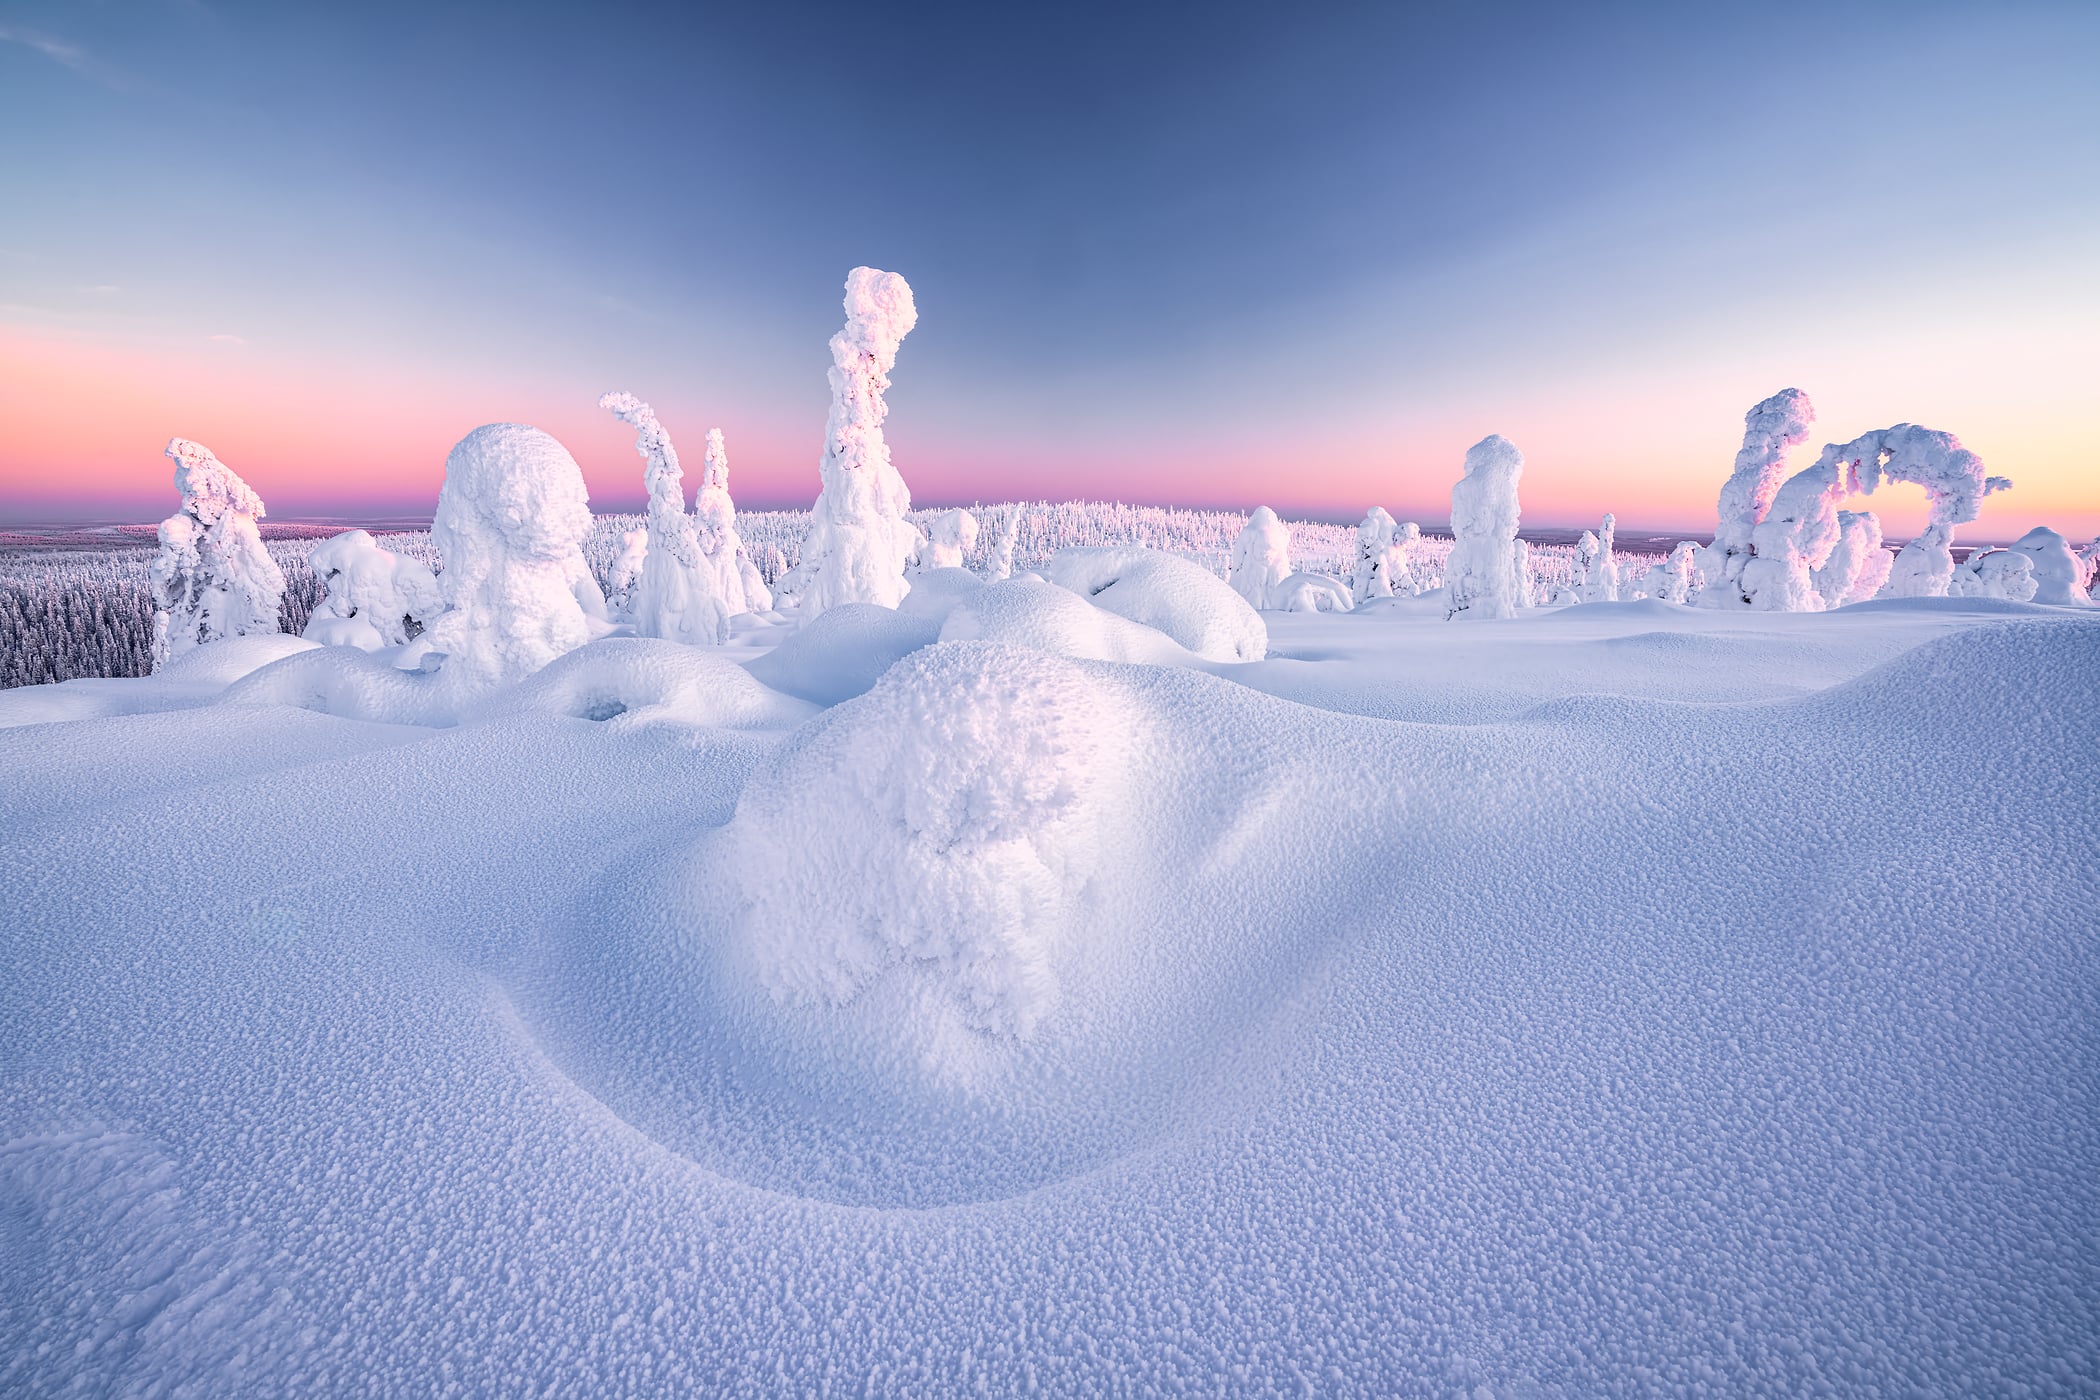 150 megapixels! A very high resolution, large-format VAST photo print of a snow-covered landscape in the Arctic with snow-covered trees; photograph created by Roberto Moiola in Riisitunturi National Park, Finland.